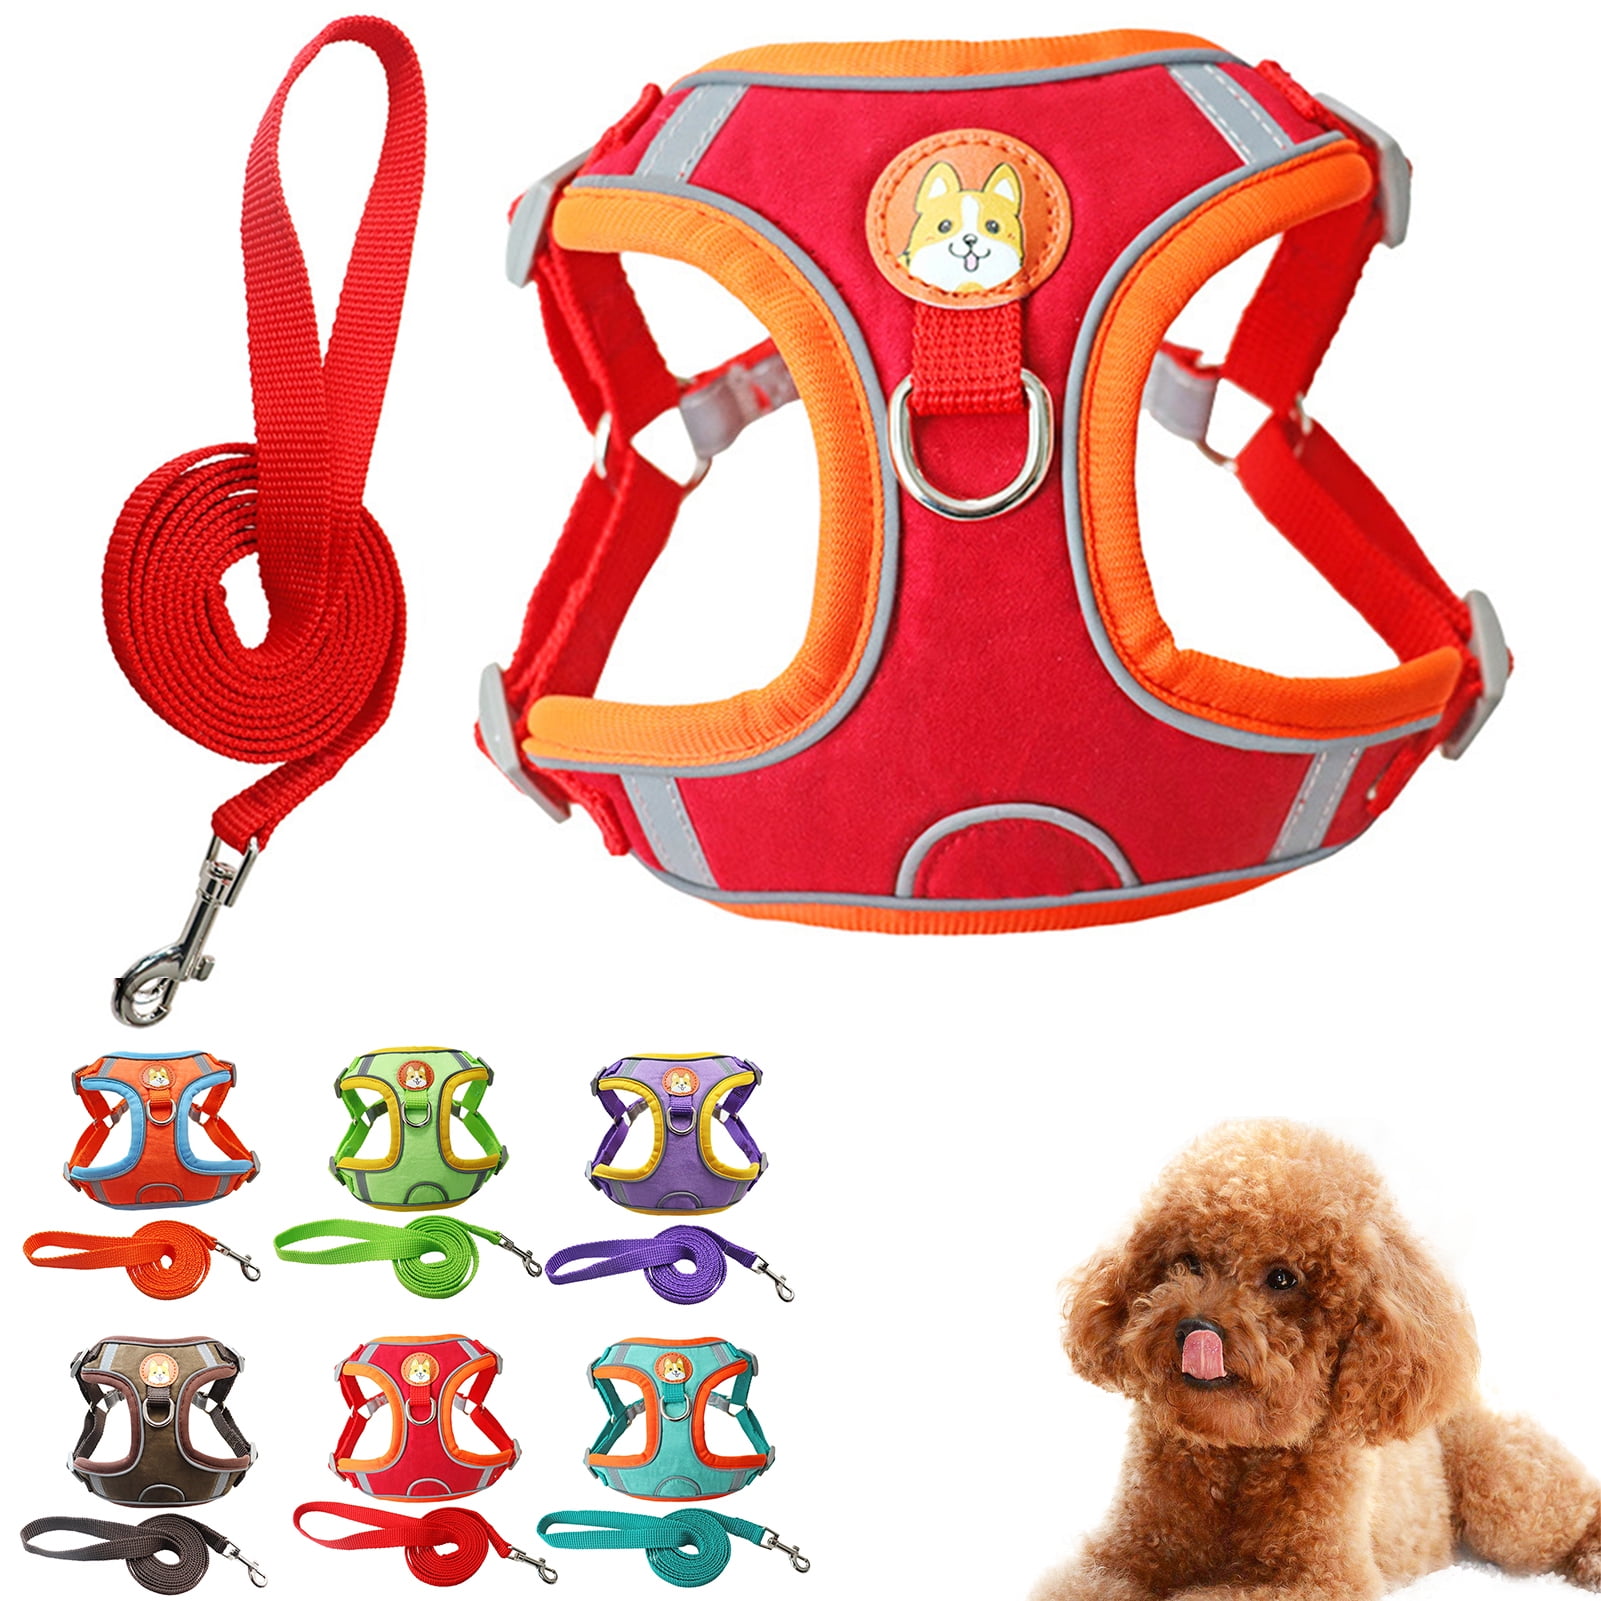 Mesh Padded Dog Harness with Leash Pet Puppy Vest for Small Medium Dogs Walking 